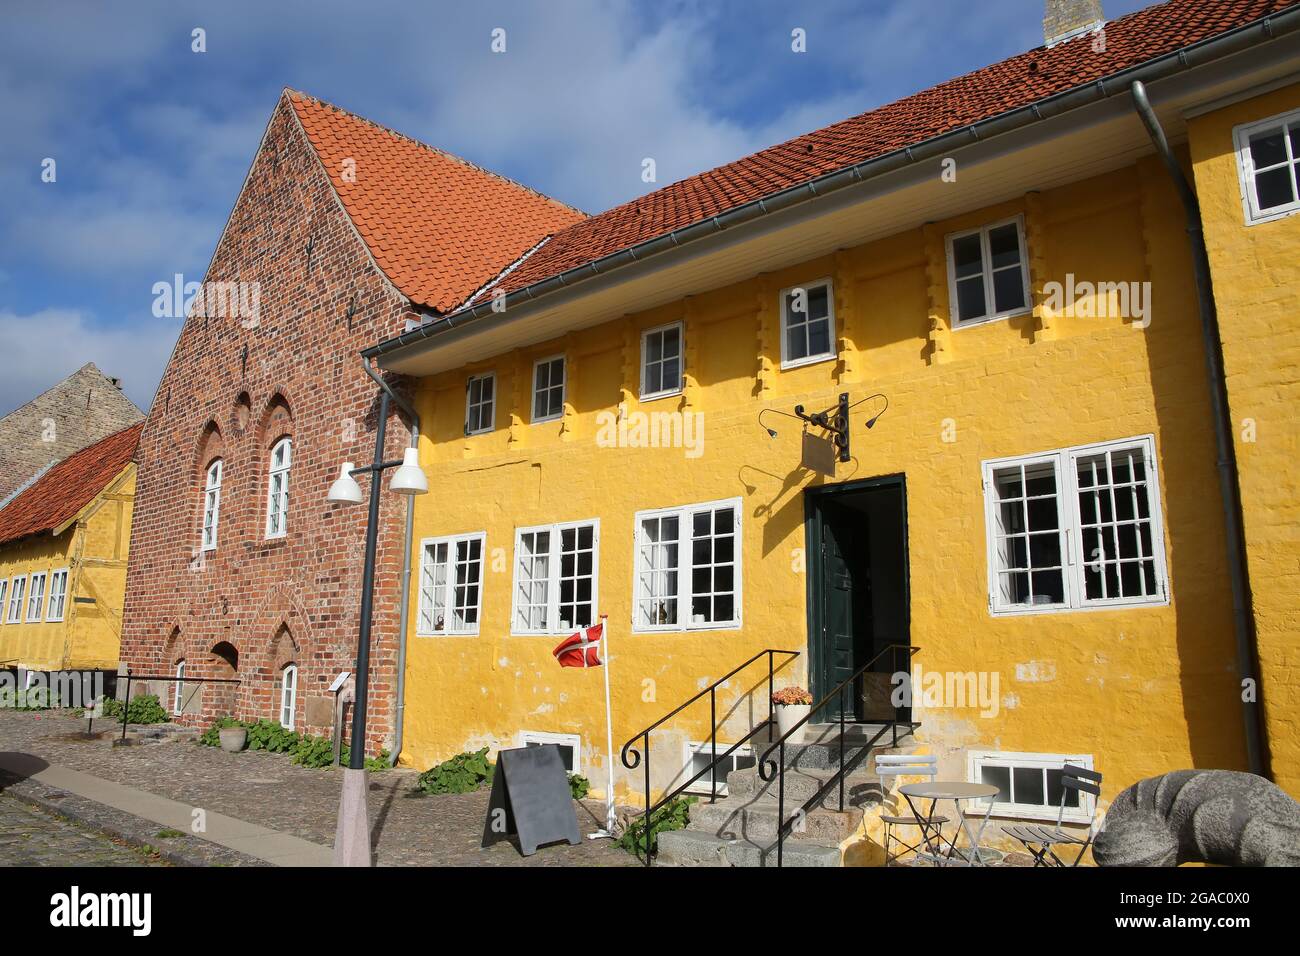 Beautiful historic building which is brick built and partially painted yellow, which is a landmark in Kalundborg, Denmark. Stock Photo